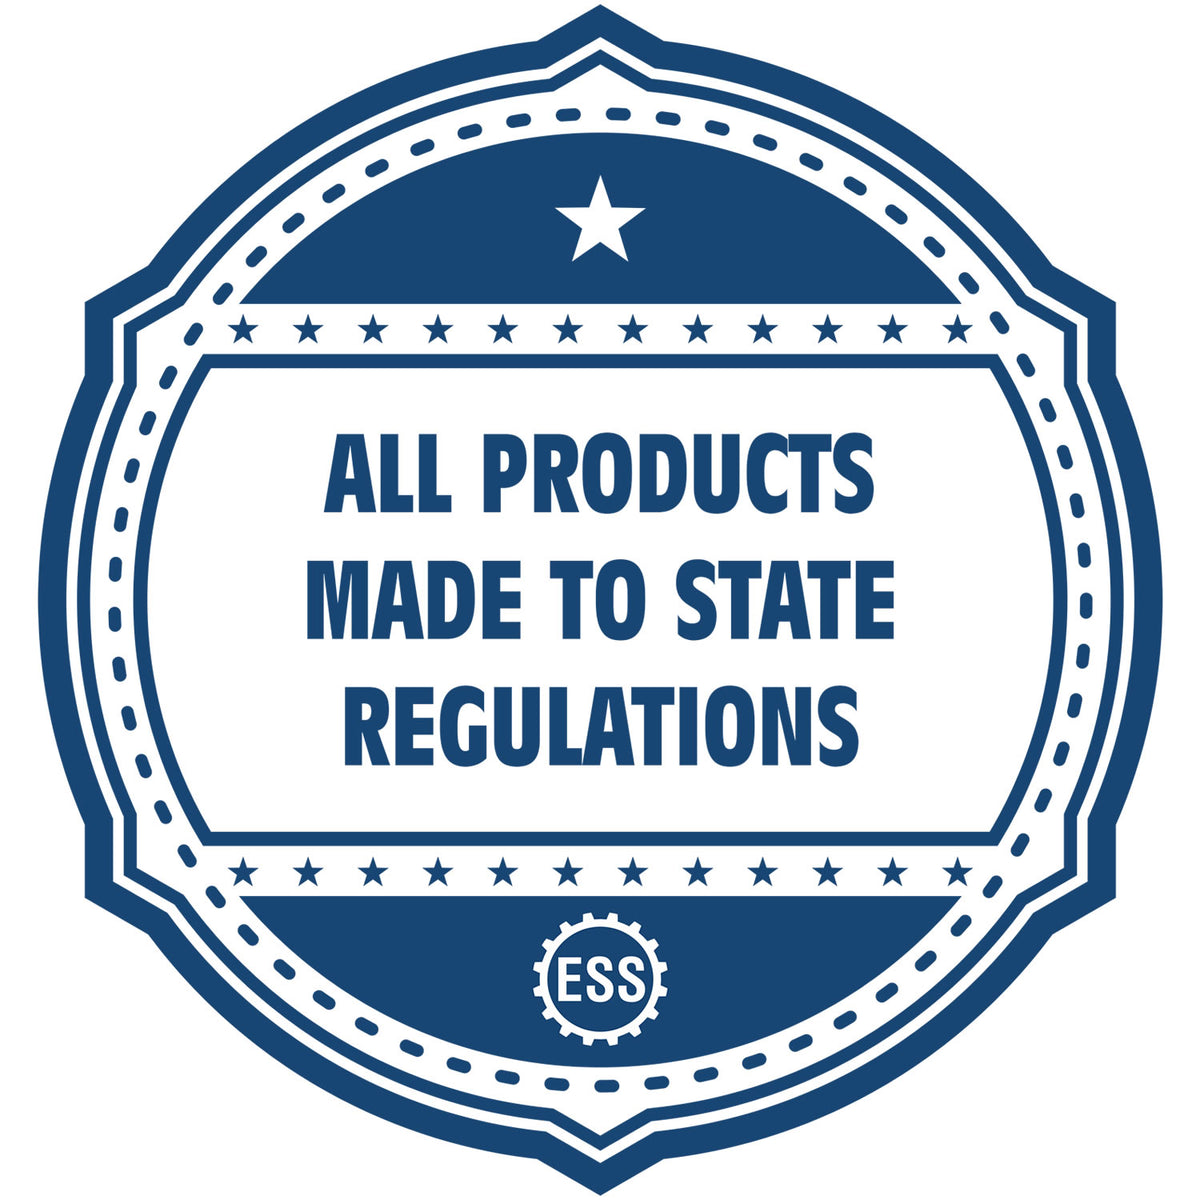 An icon or badge element for the Slim Pre-Inked Pennsylvania Land Surveyor Seal Stamp showing that this product is made in compliance with state regulations.